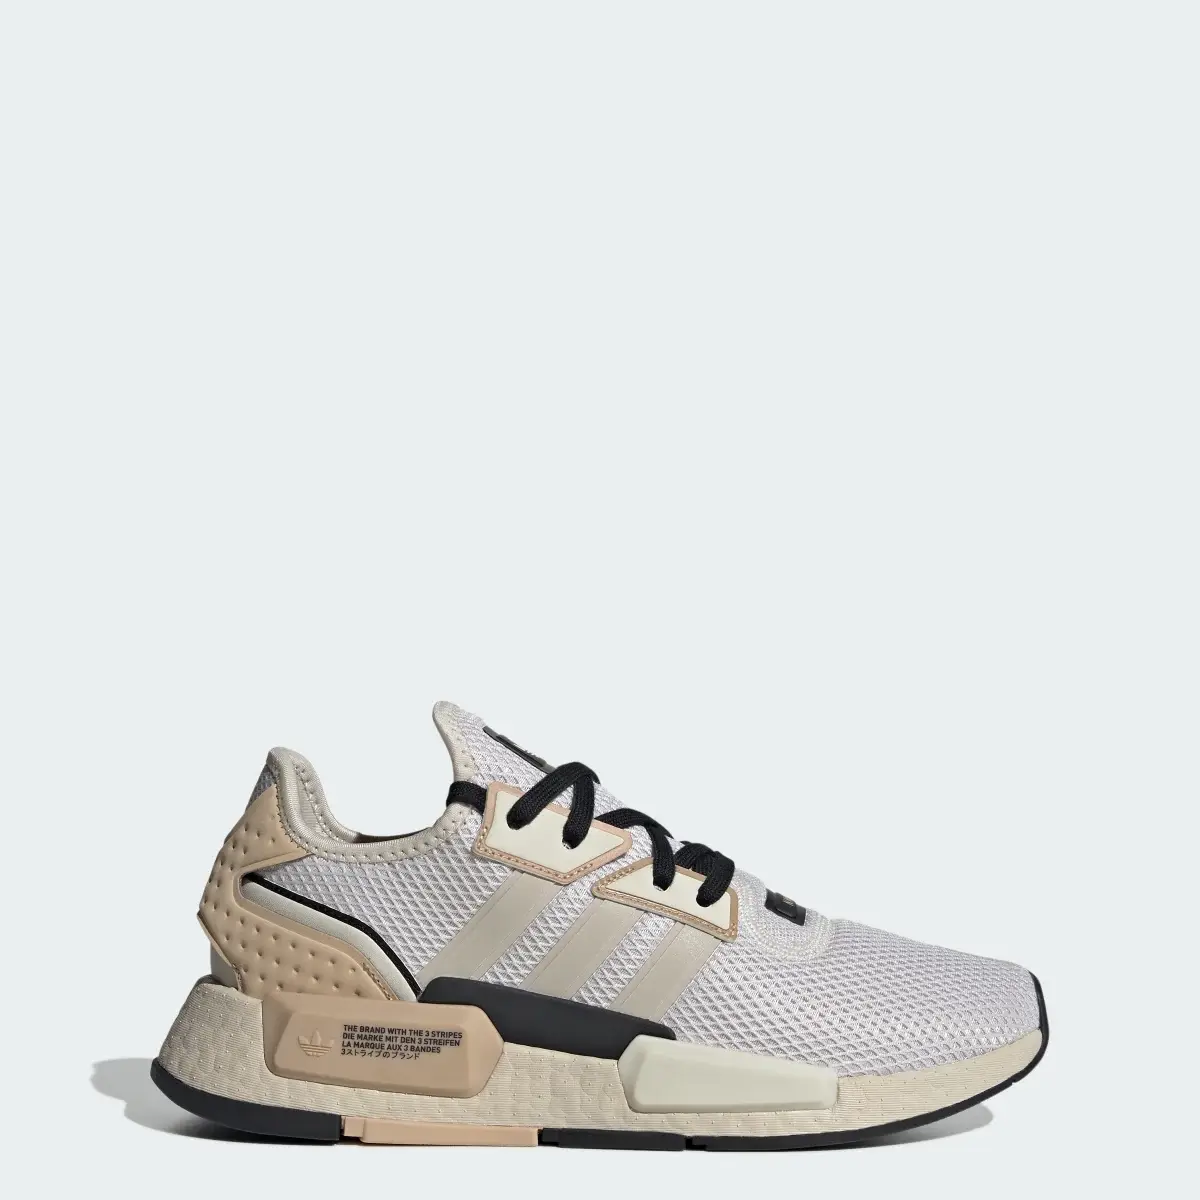 Adidas NMD_G1 Shoes. 1